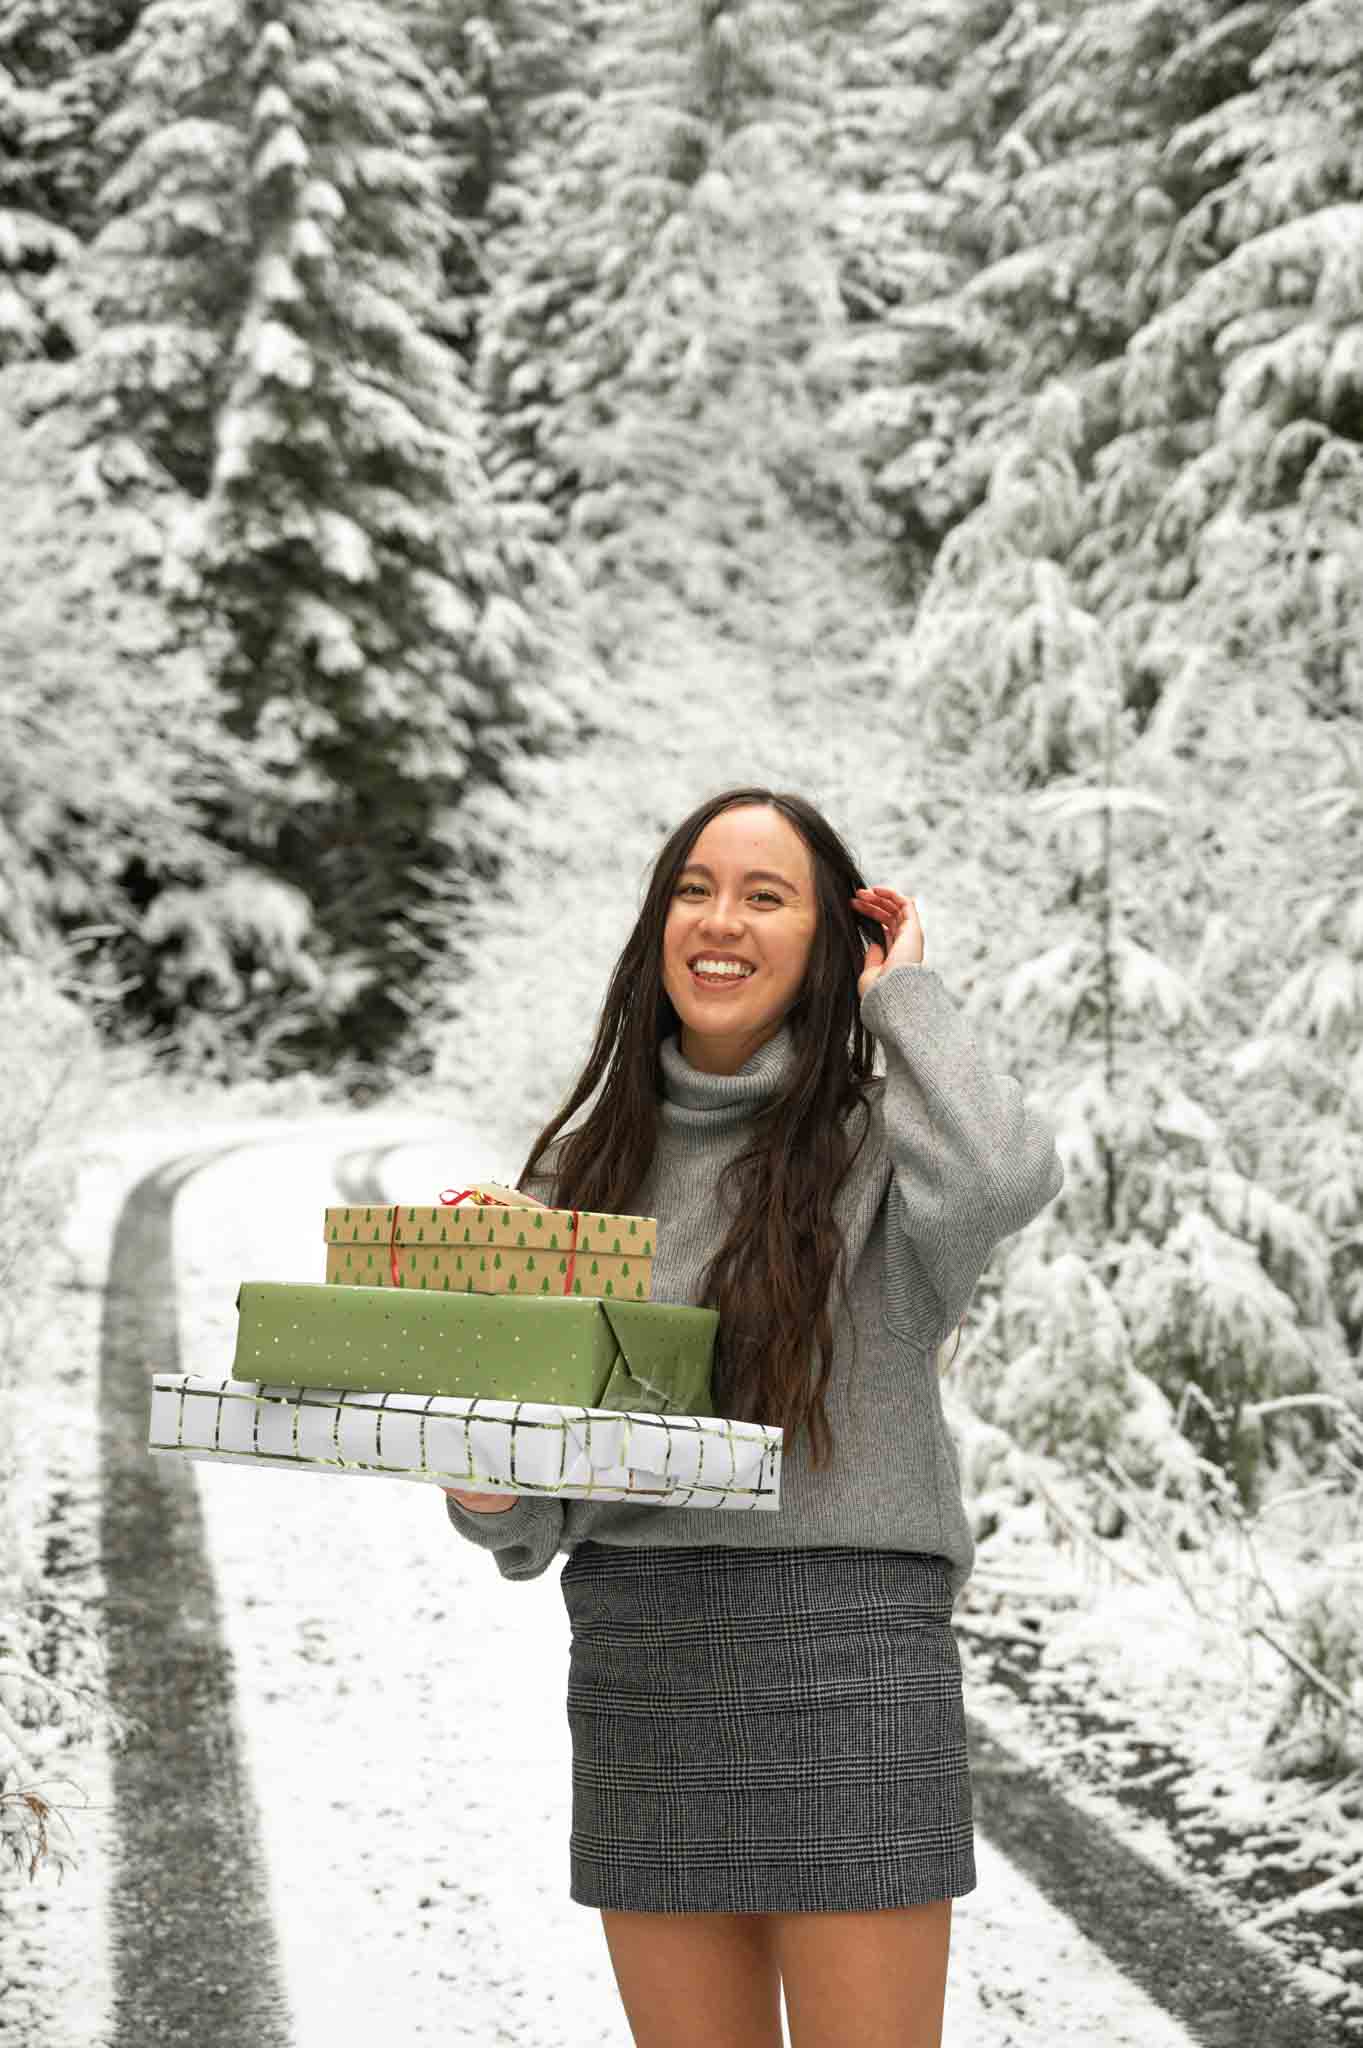 Pacific Northwest lifestyle blogger holding holiday presents in a snowy scene, and sharing travel gifts for women